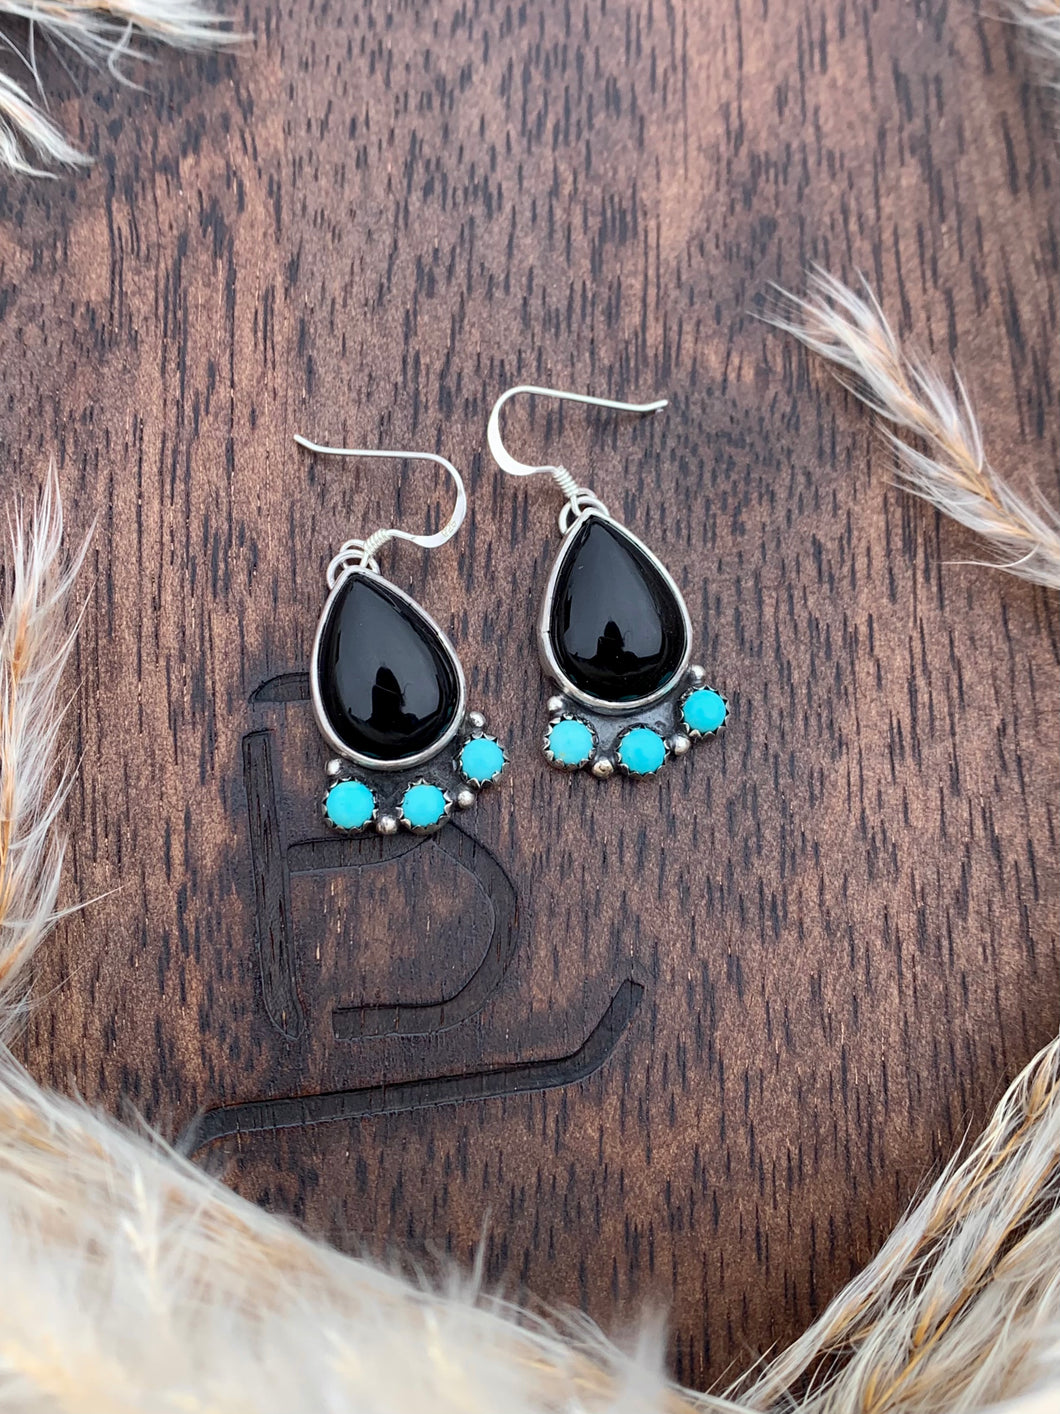 Black Onyx and Turquoise Dangles